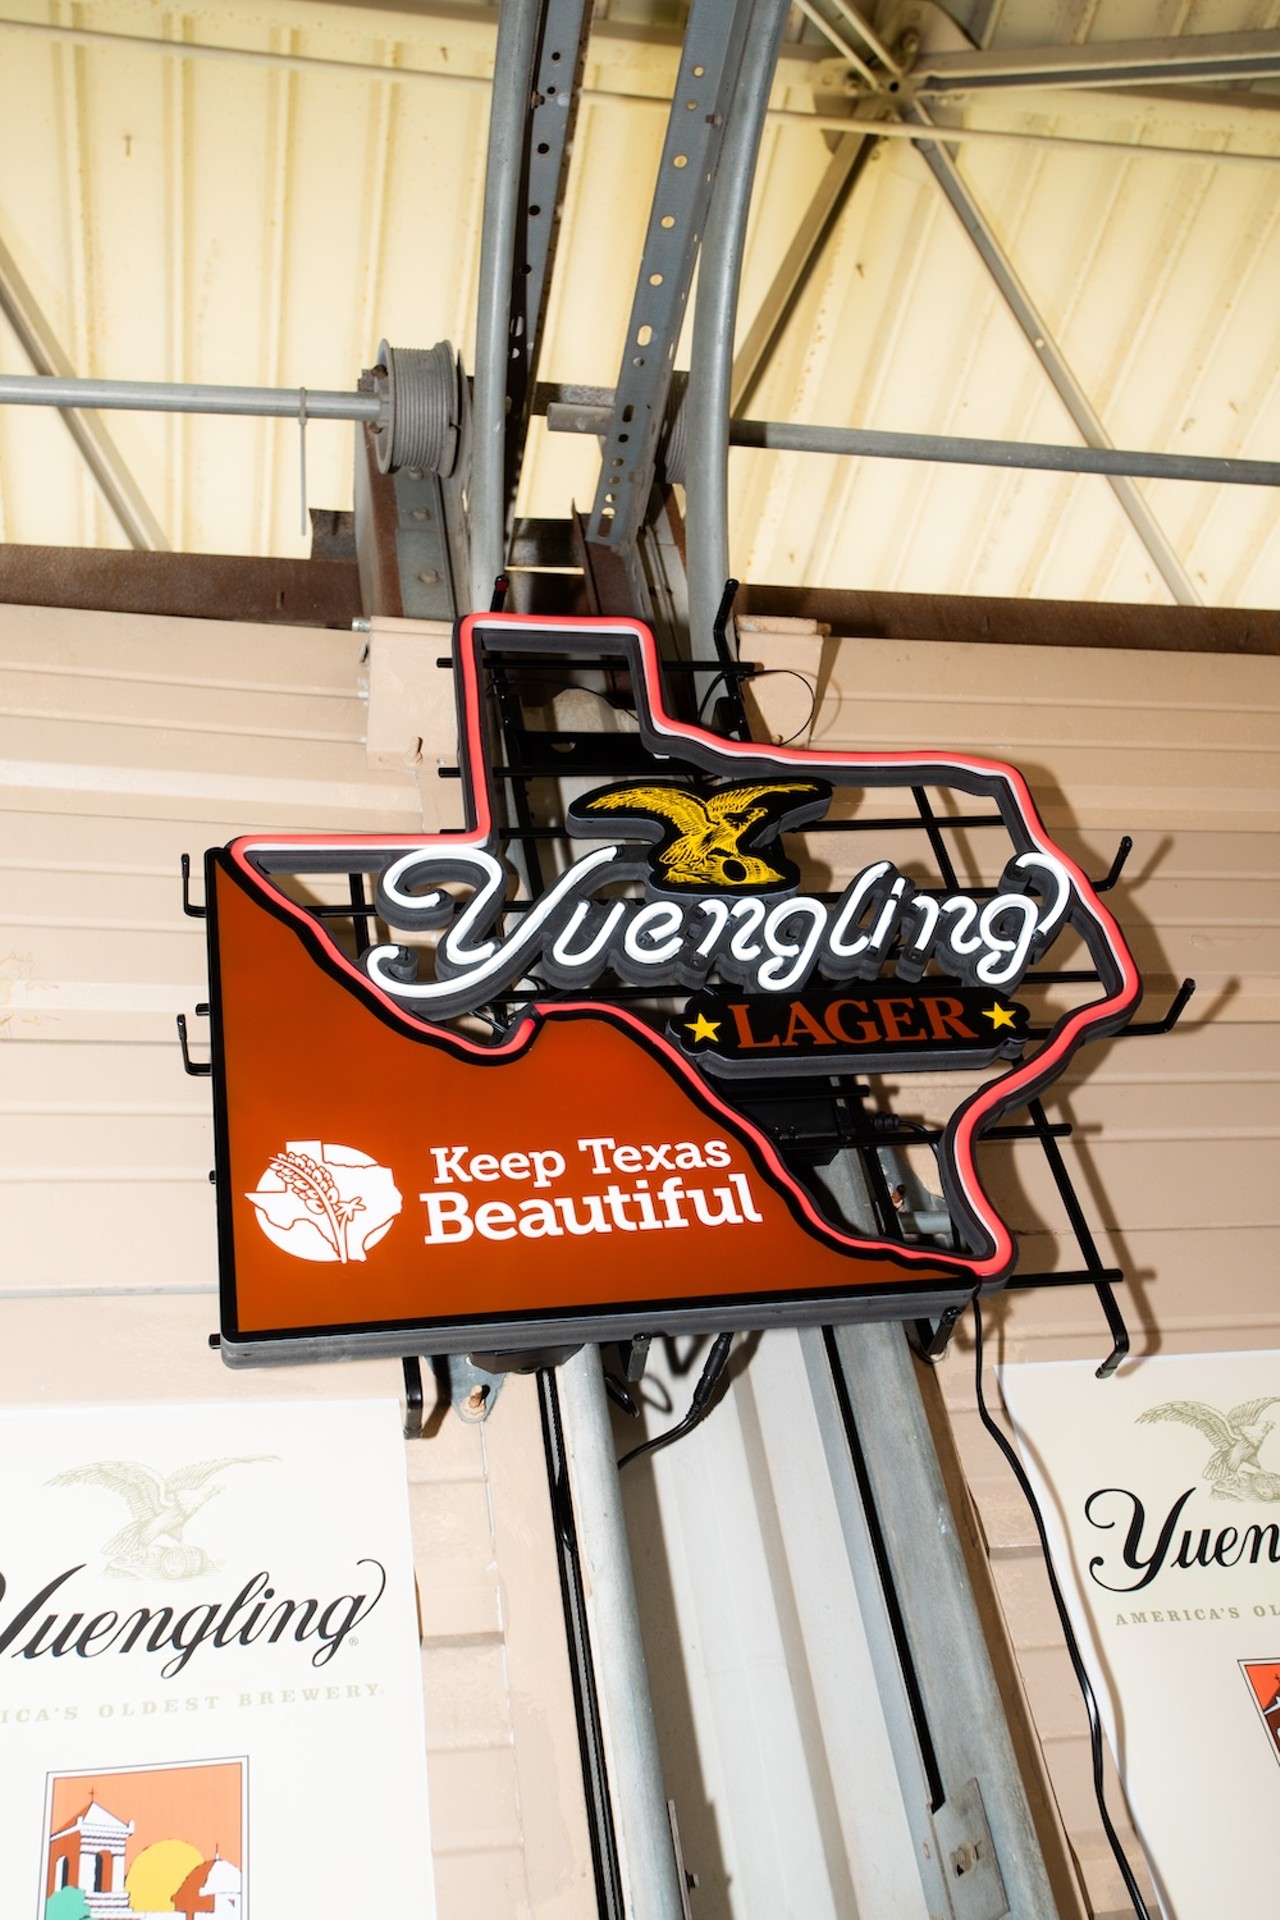 Yuengling Texas Clean Up Beautification Day